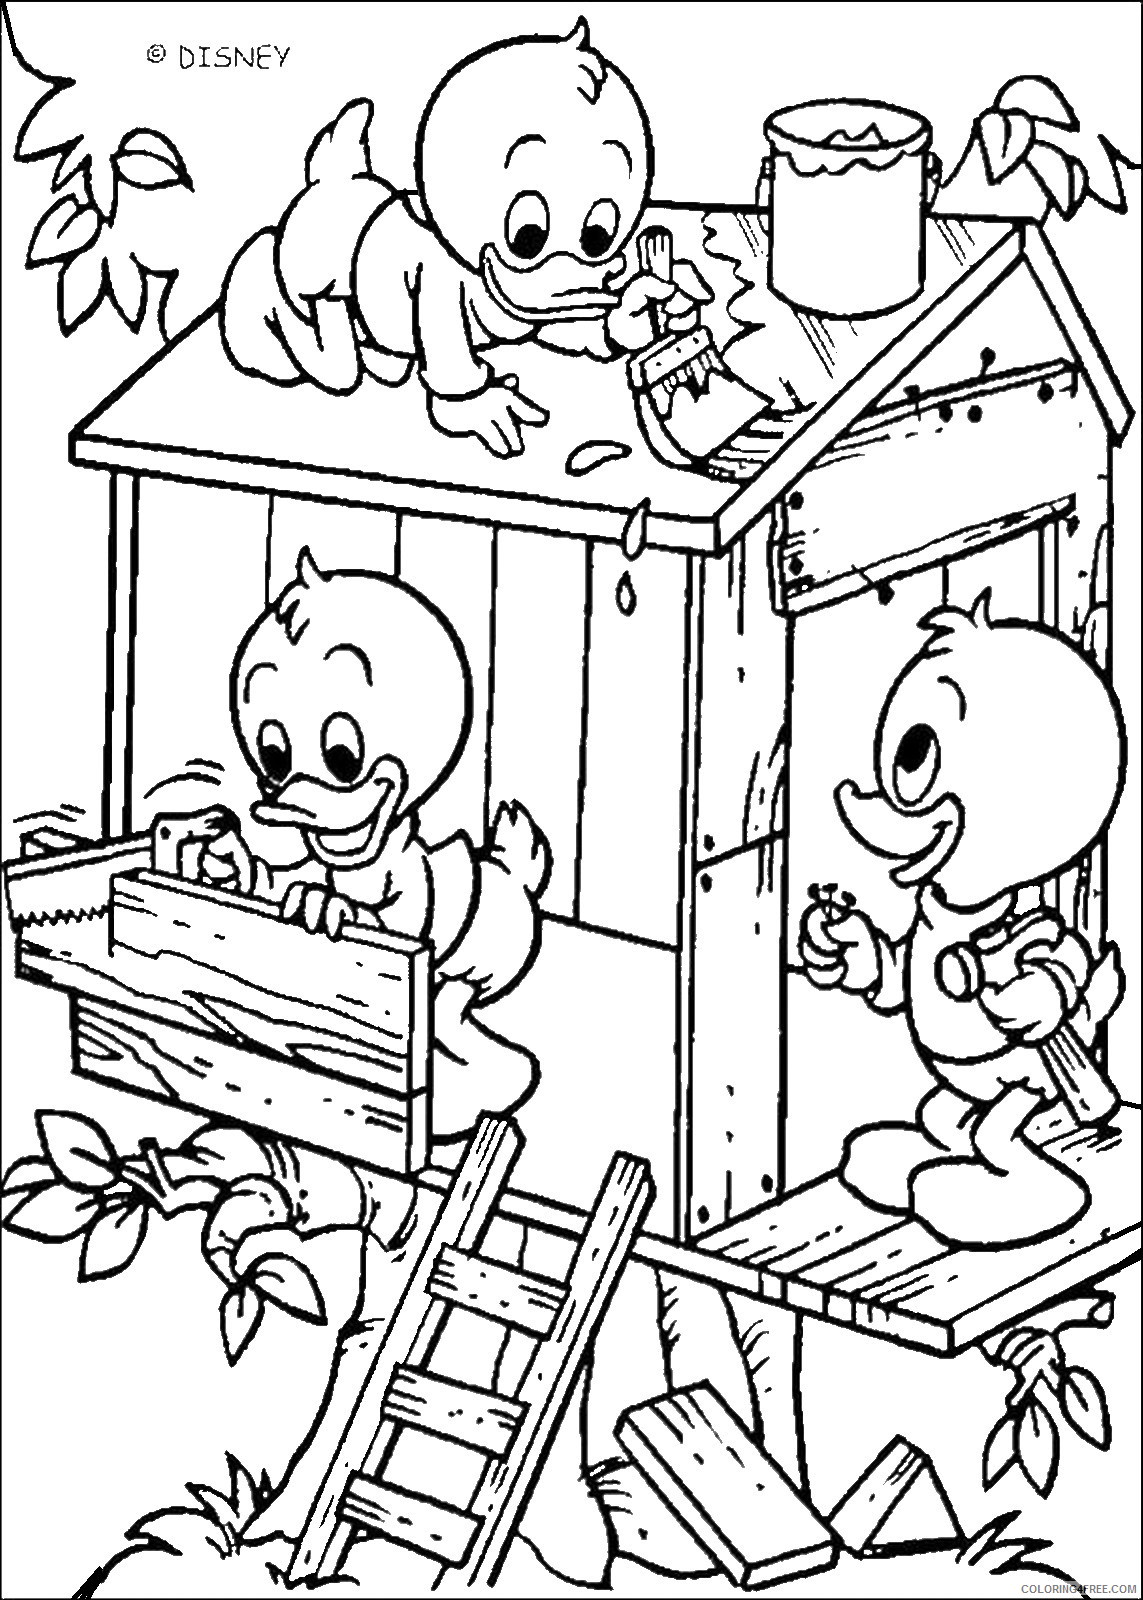 Donald Duck Coloring Pages Cartoons donald_49 Printable 2020 2527 Coloring4free